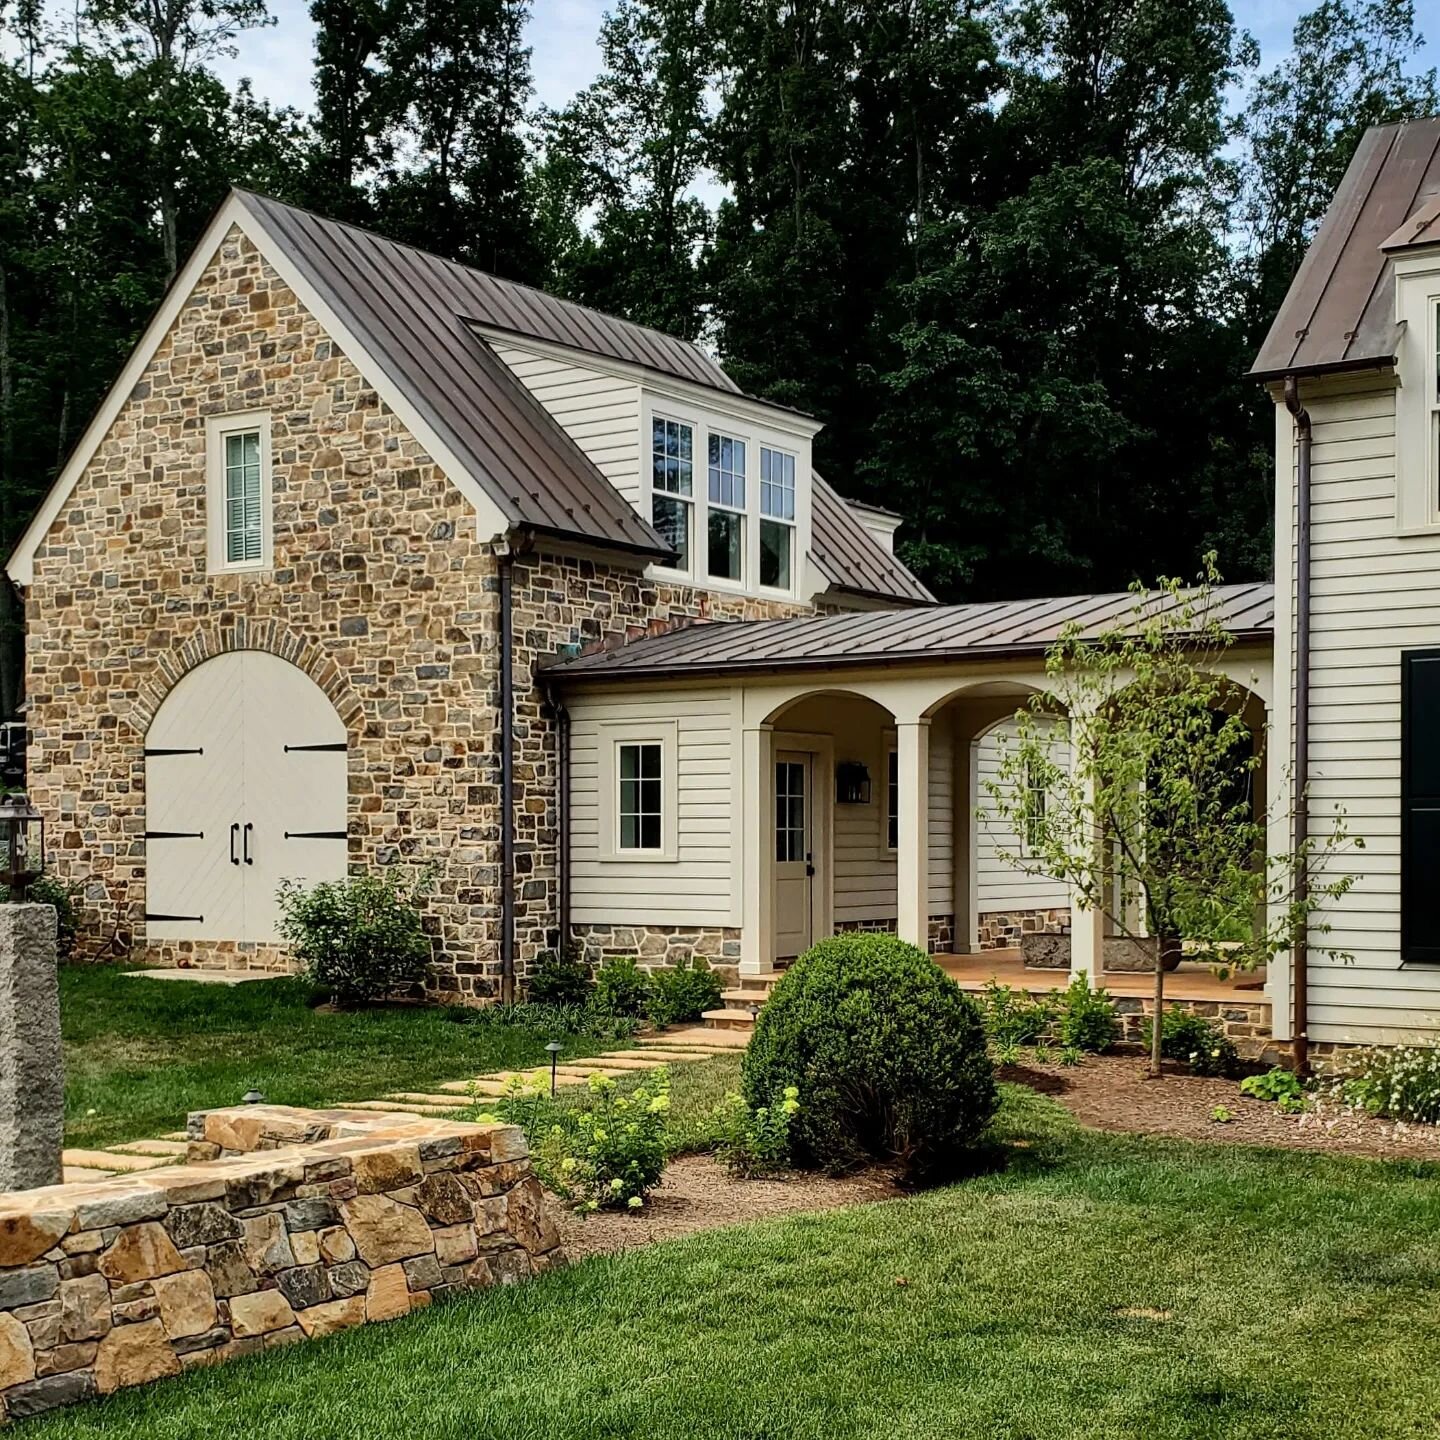 Carriage house and dog trot from a recently completed project. And, yes, that is a stone trough for watering the dogs on the dog trot porch.
#stonebuilding #carriagehouse #stonewalls #albemarlecountyarchitecture